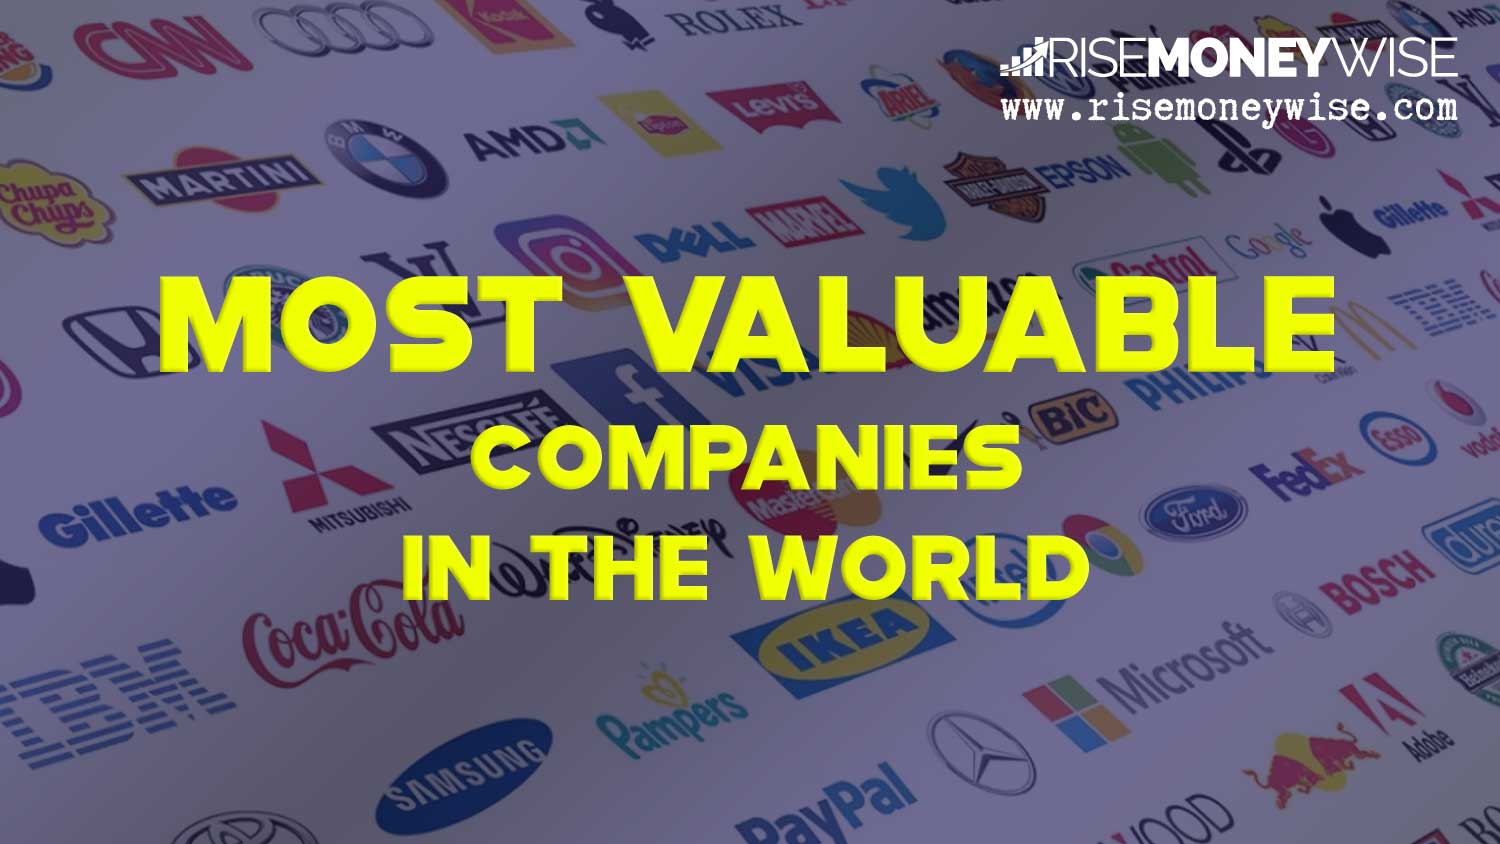 The Biggest Most Valuable Companies in the World